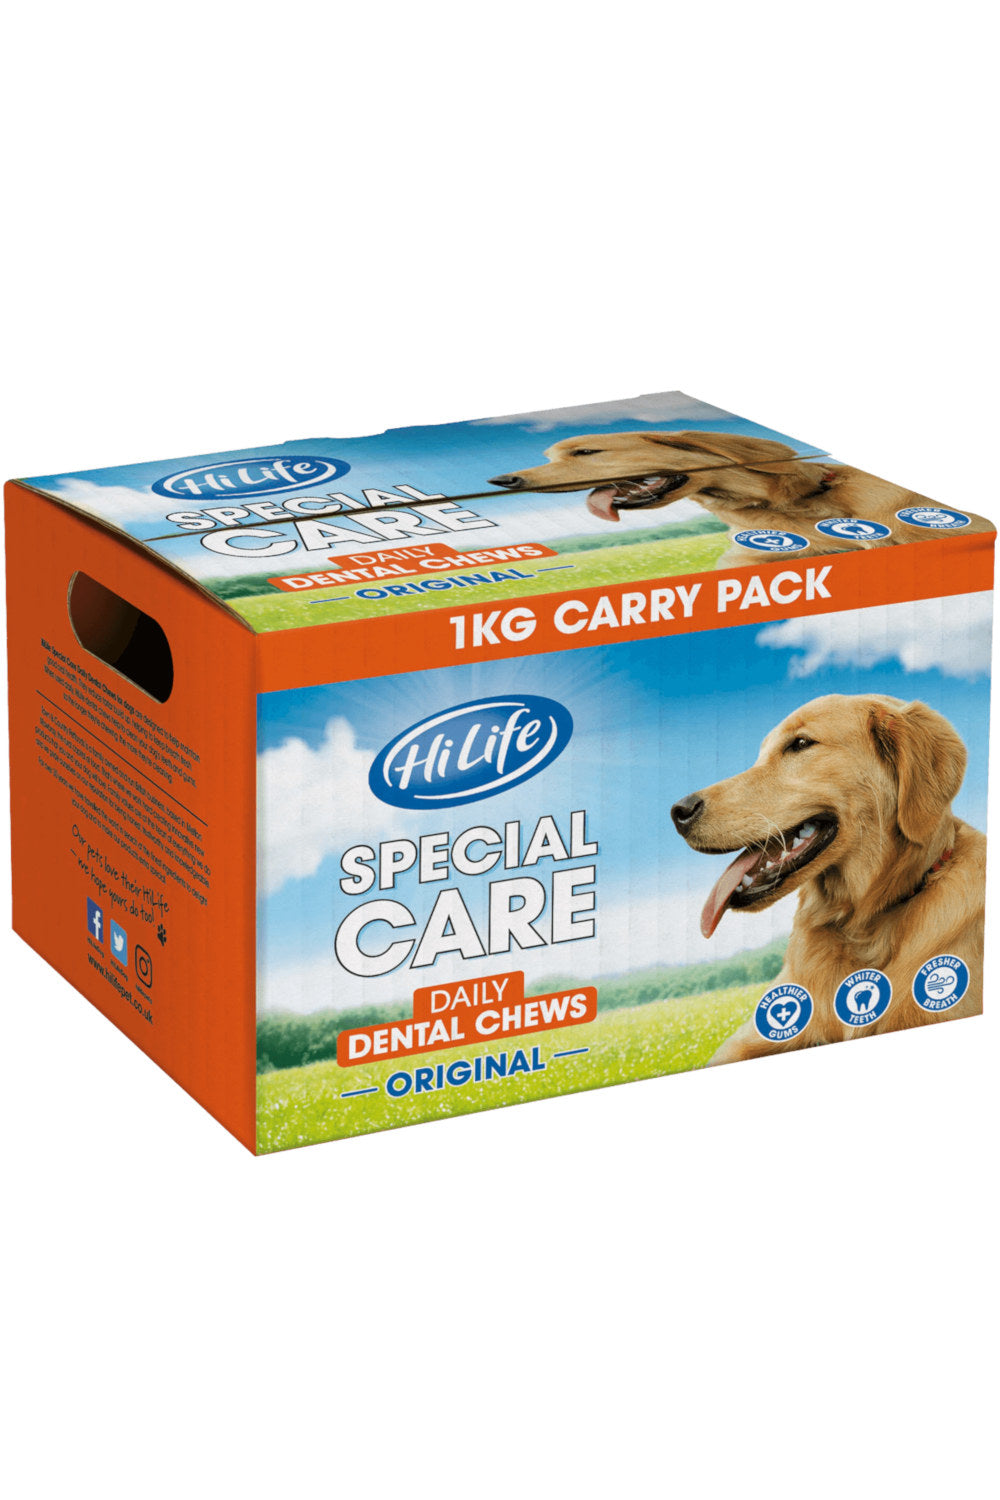 Hilife Special Care Daily Dental Dog Chews (May Vary) (2.2lb)